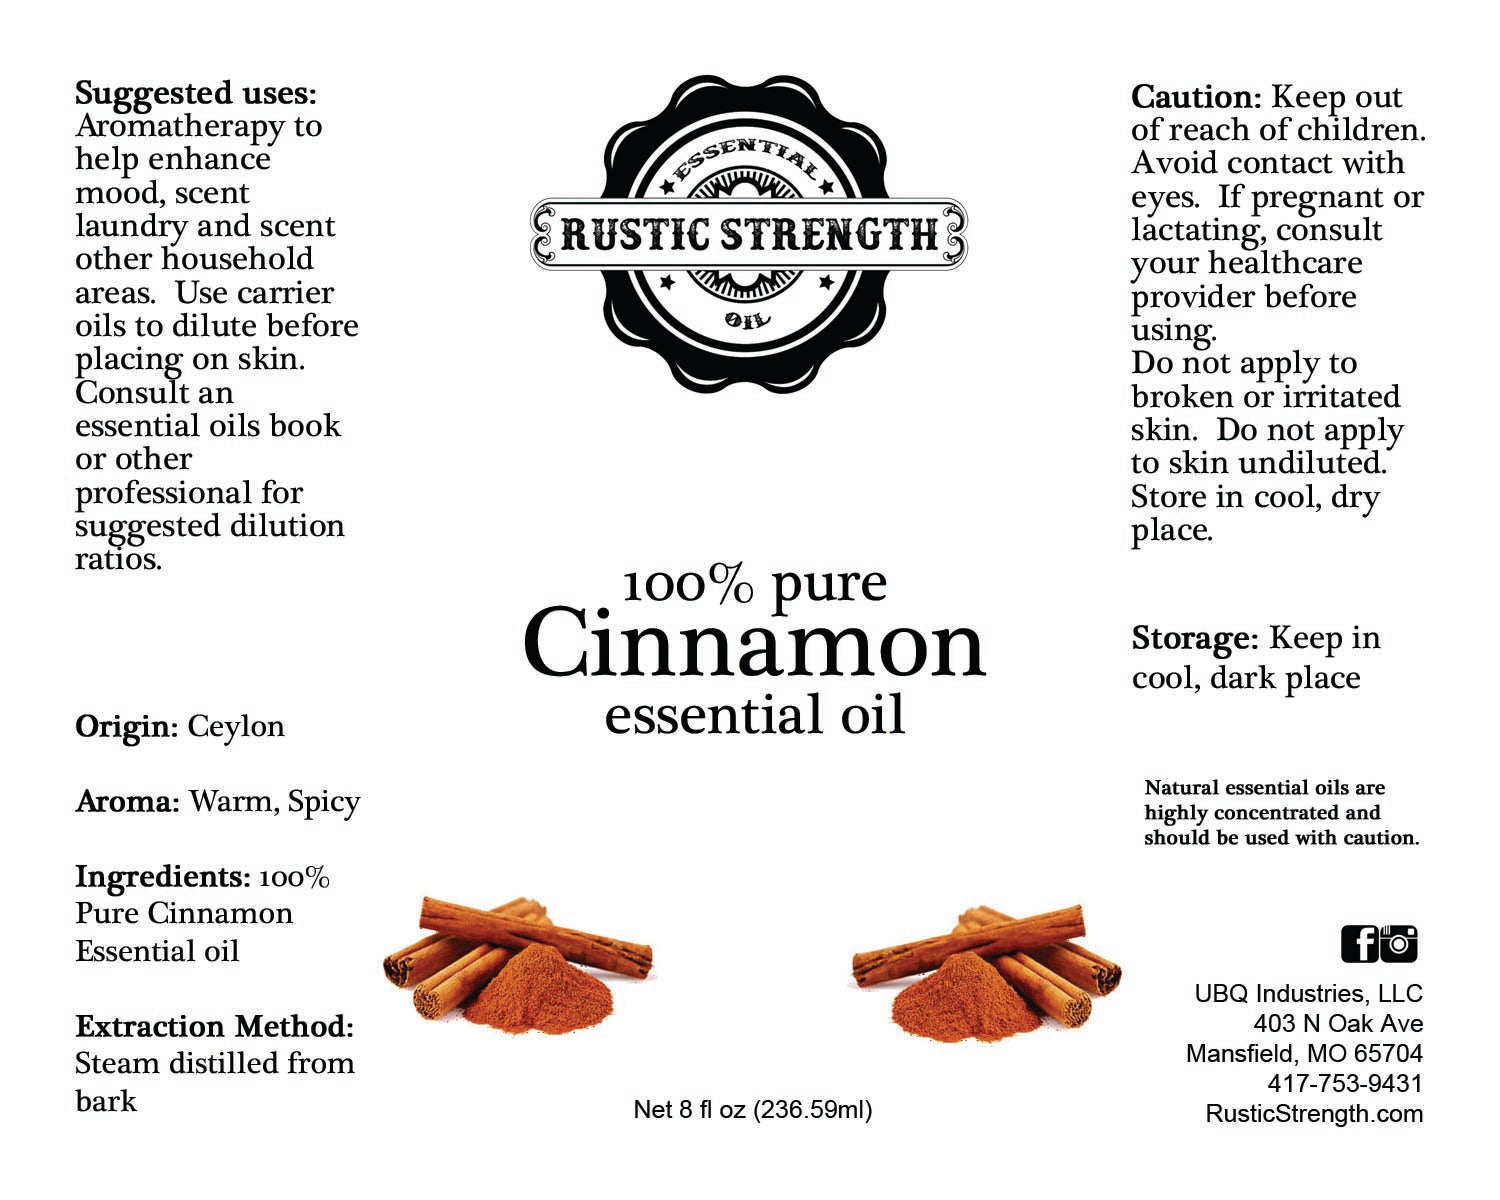 Cinnamon Essential Oil Diffuser Benefits and Blends